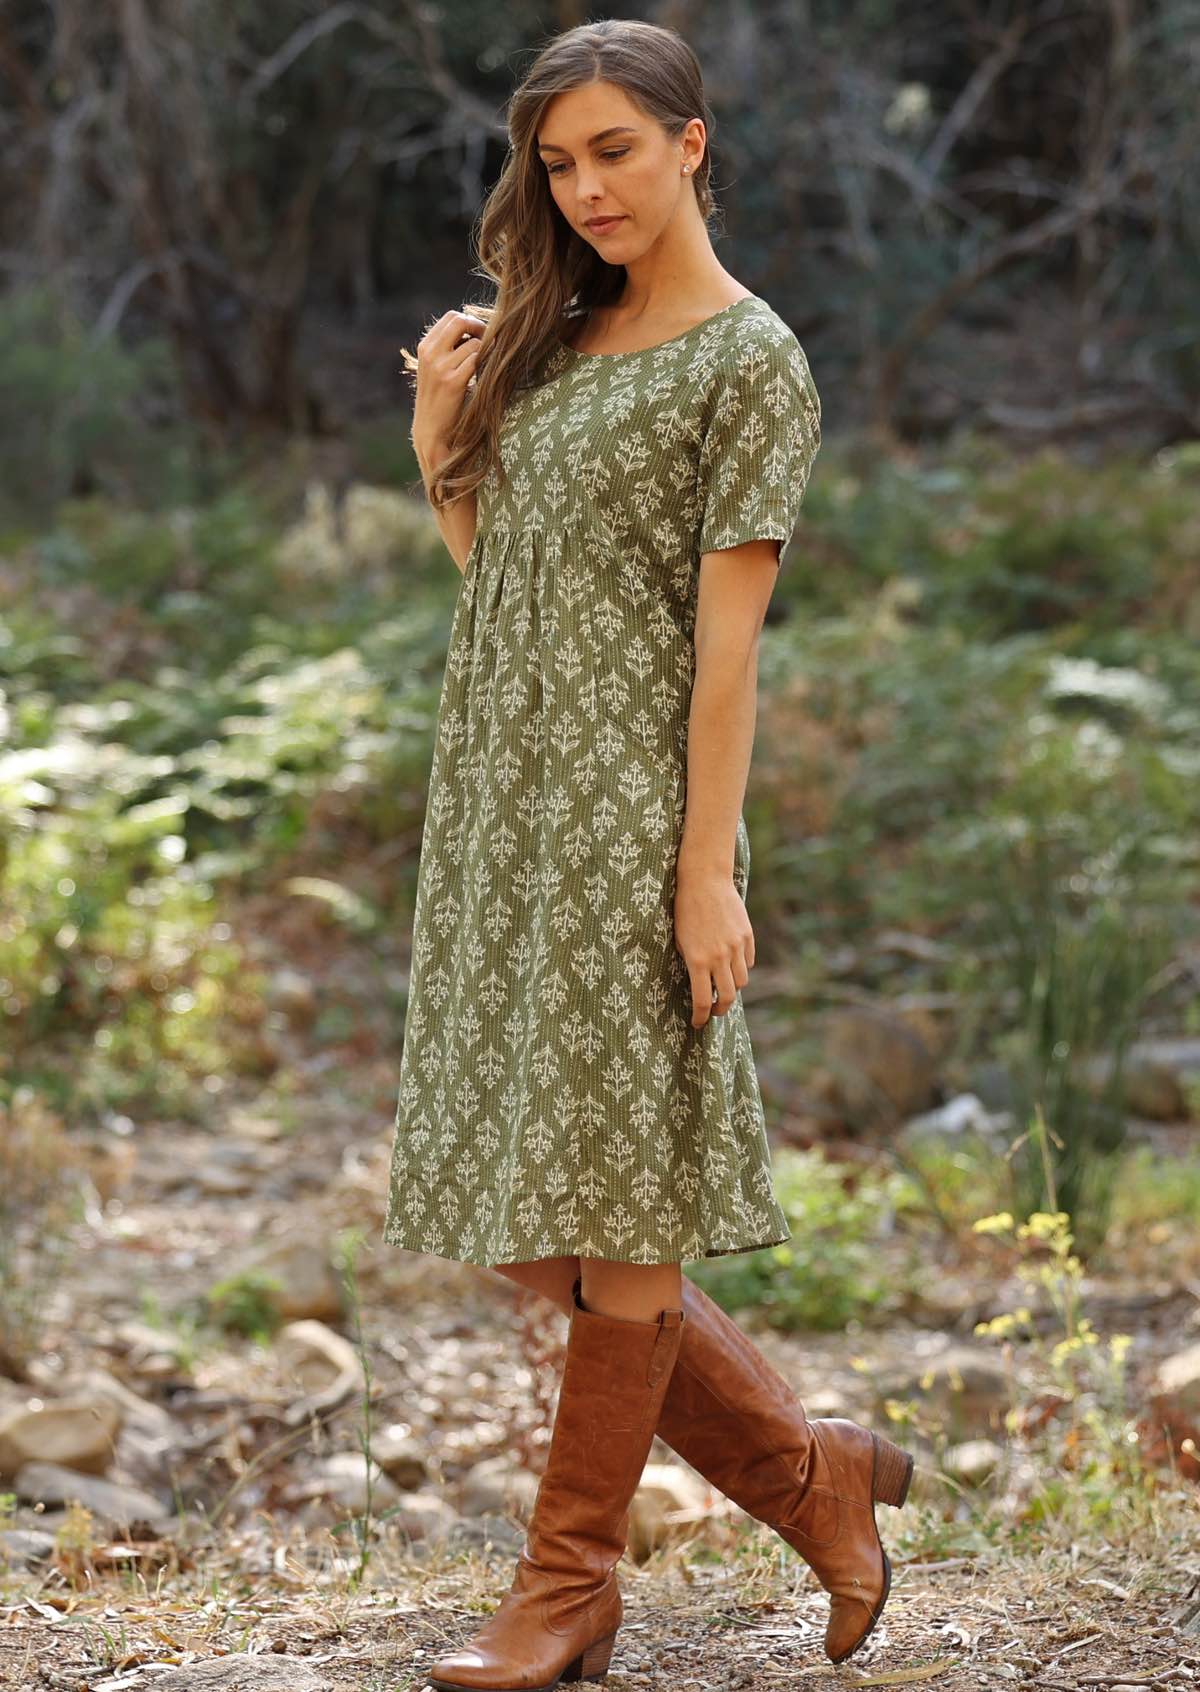 Cotton dress with short sleeves and pockets is fully lined